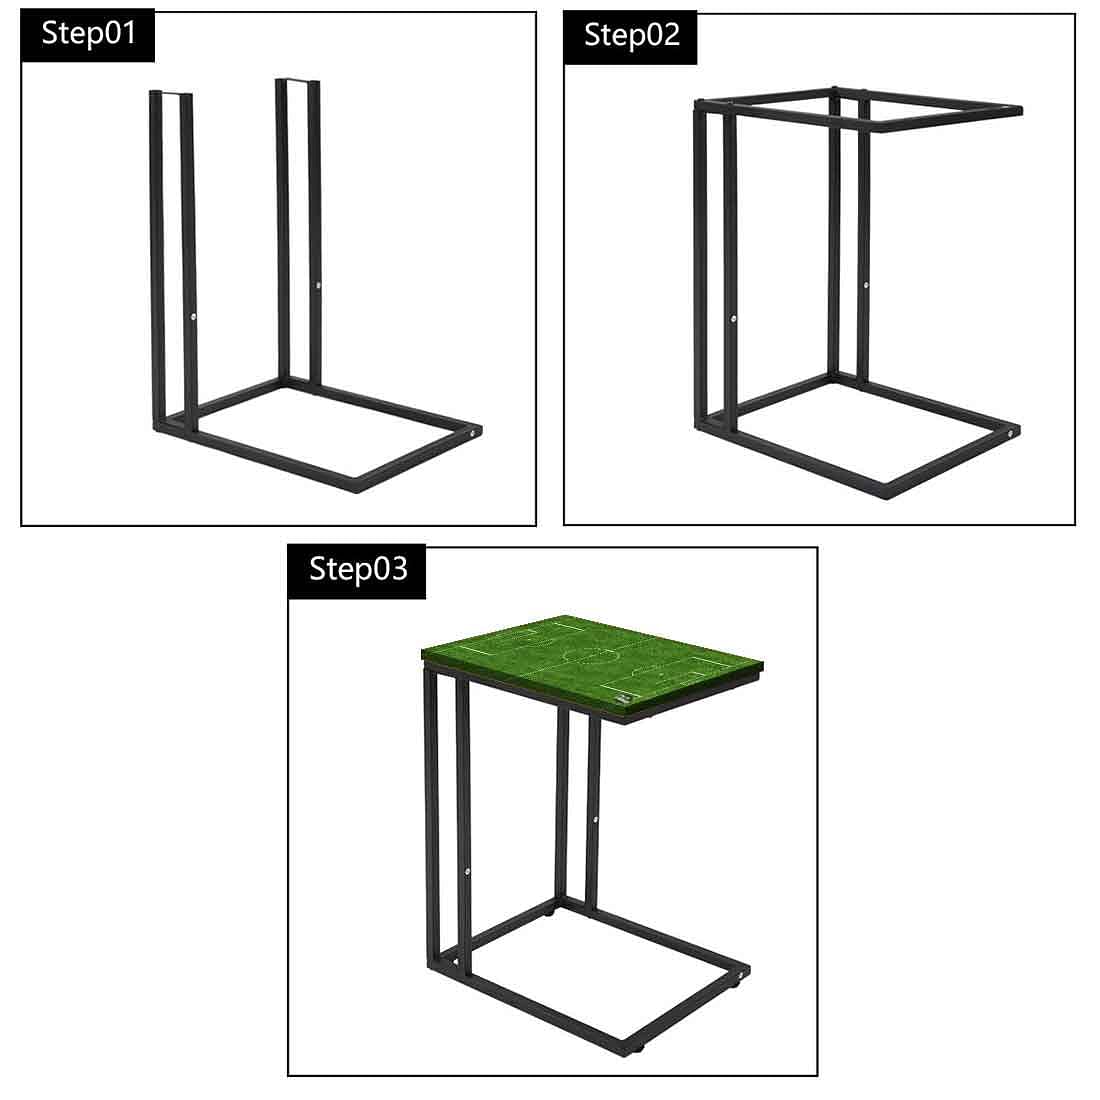 Small C Shaped Table For Sofa - Football Pitch Nutcase